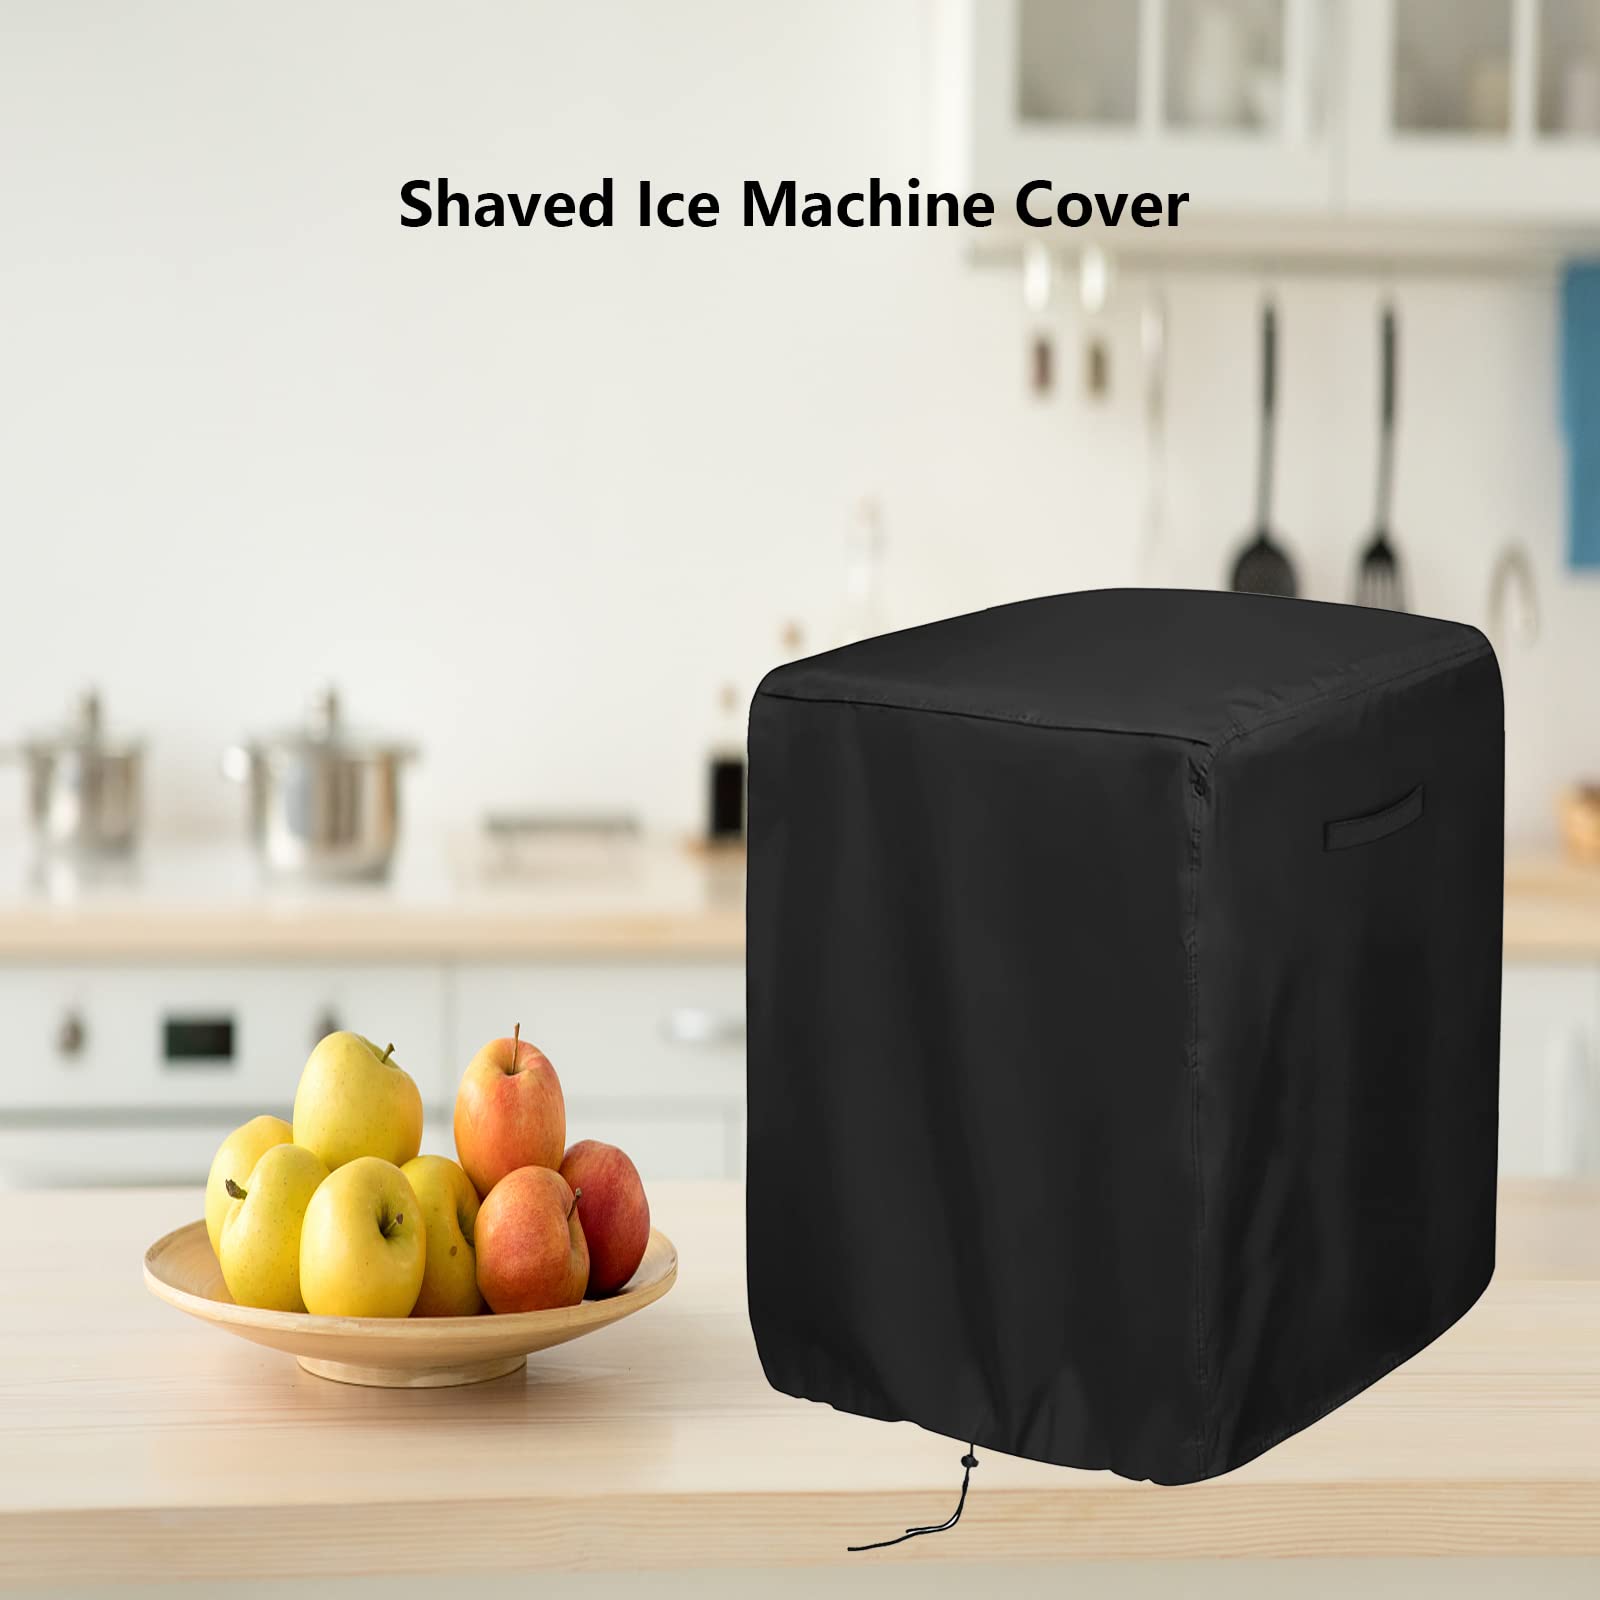 TwoPone Shaved Ice Maker Cover for AGLUCKY Countertop Ice Maker Machine,Dustproof Electric Snow Cone Maker Cover All Season Protection - 13''Lx9''W x12''H